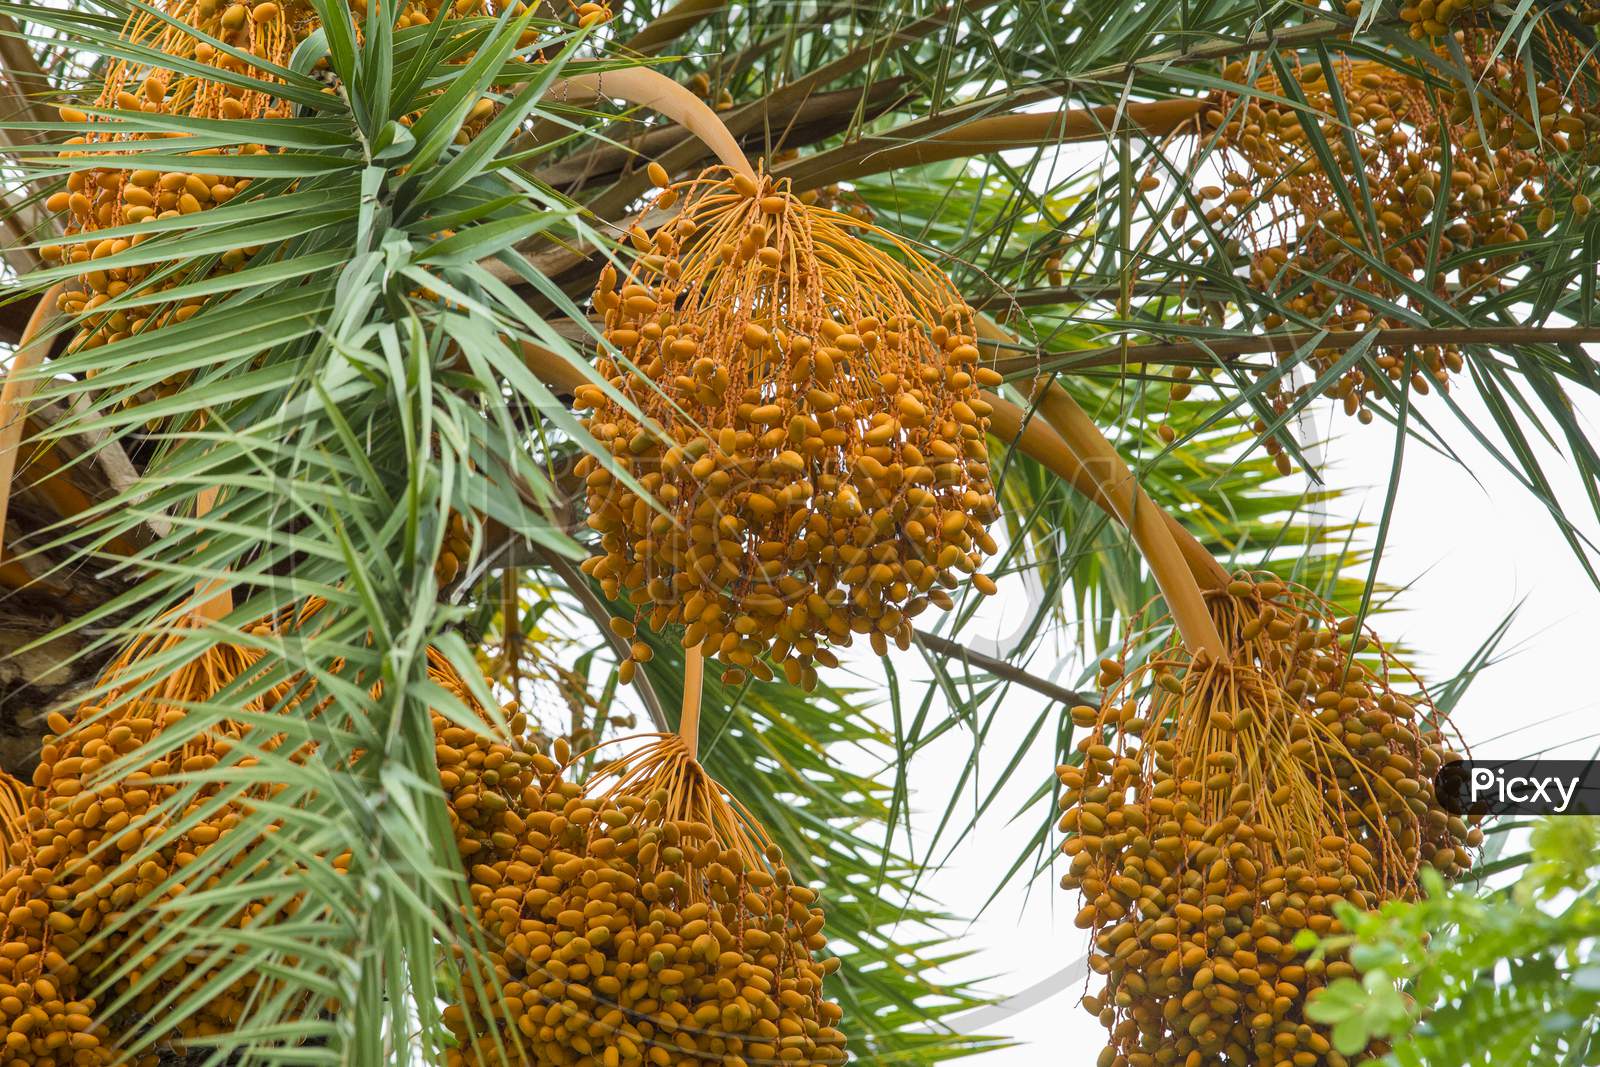 Raw Bunch Of Date Palm Hanging On The Tree.